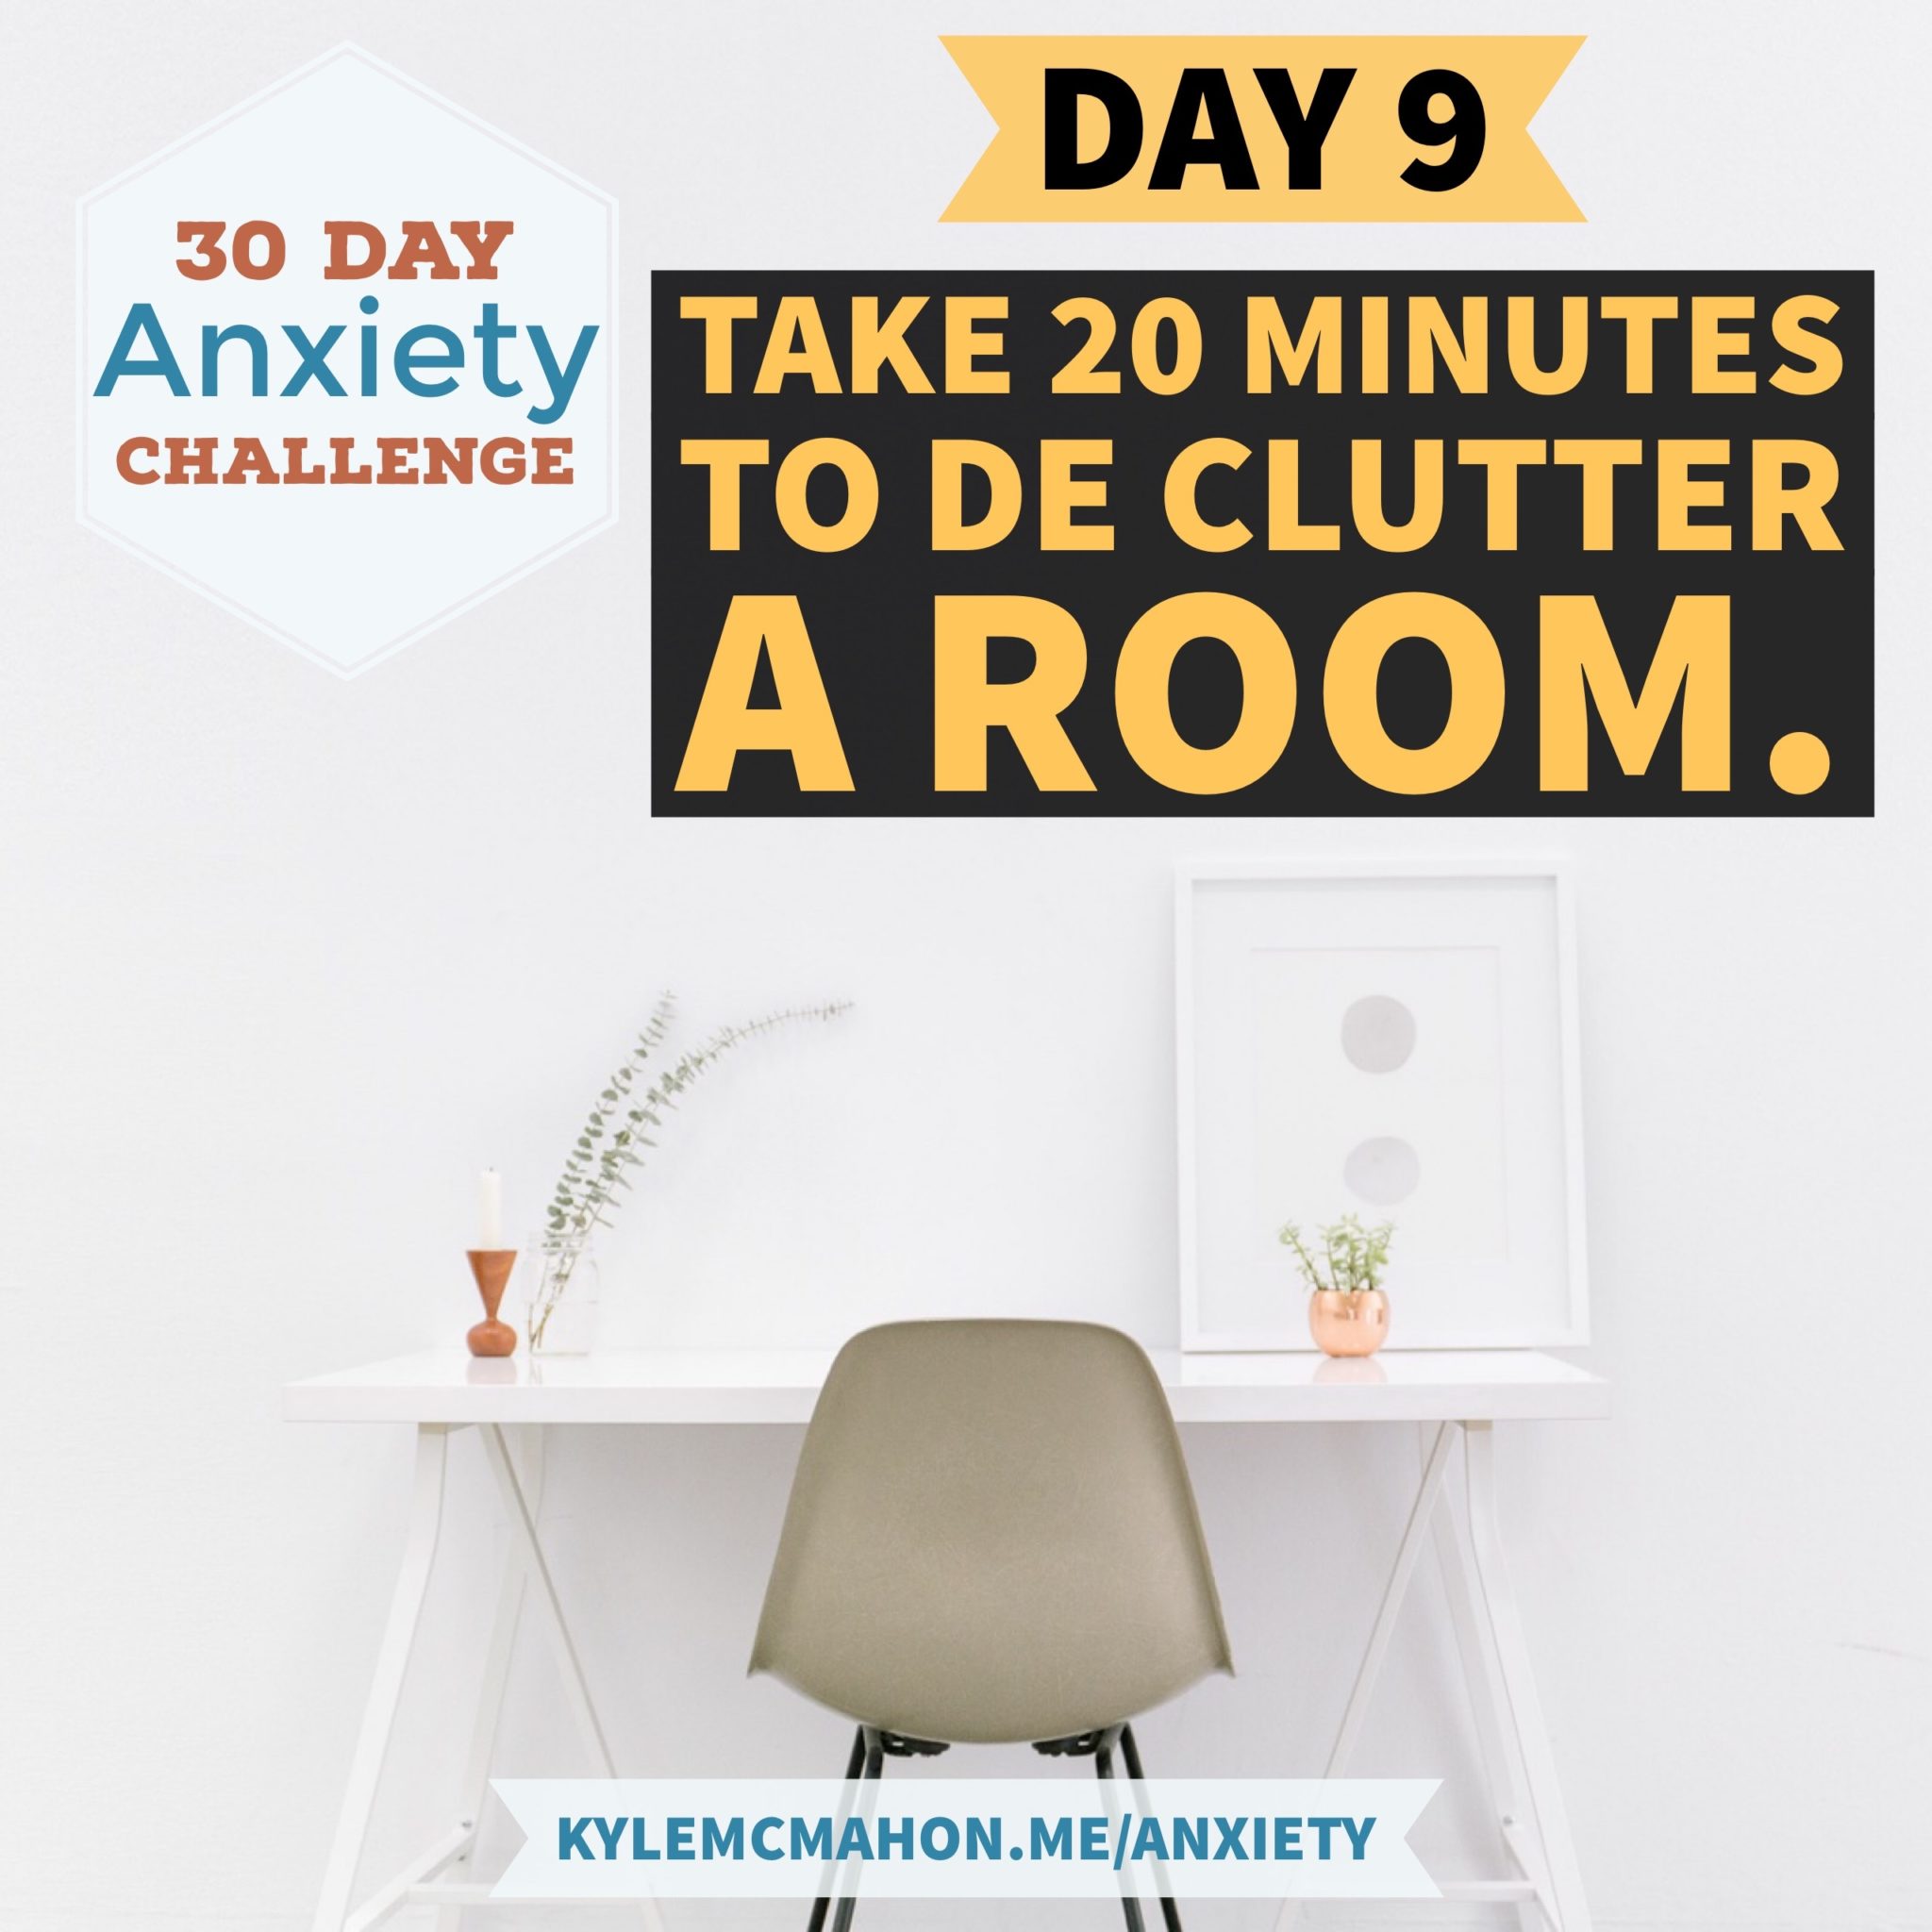 Day 9 of the 30 Day anxiety challenge